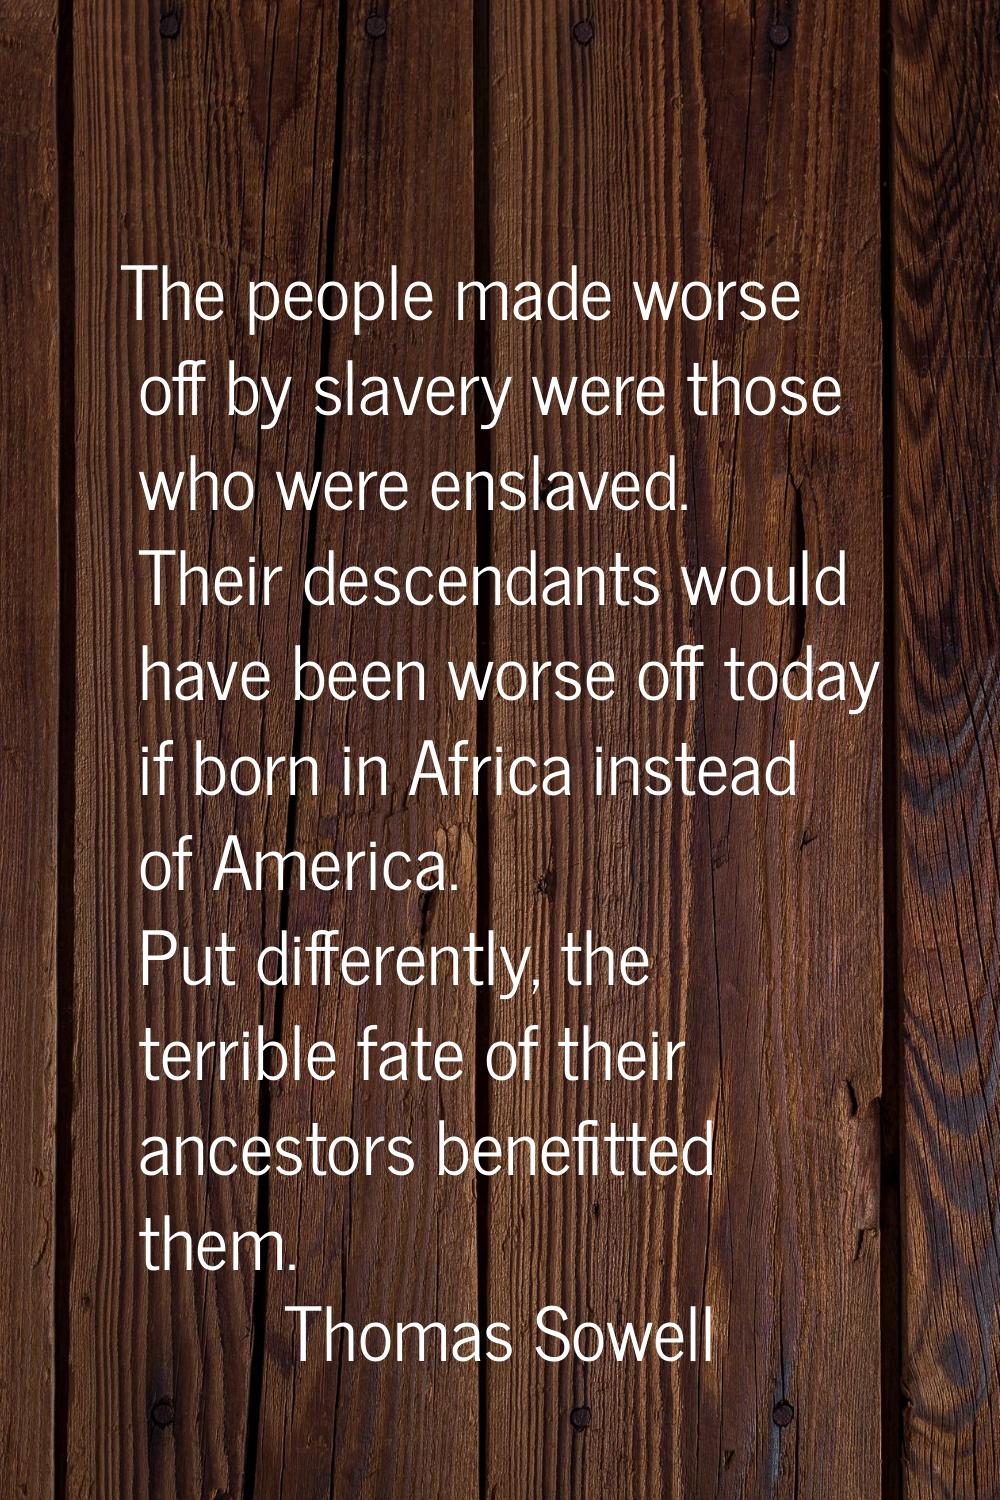 The people made worse off by slavery were those who were enslaved. Their descendants would have bee